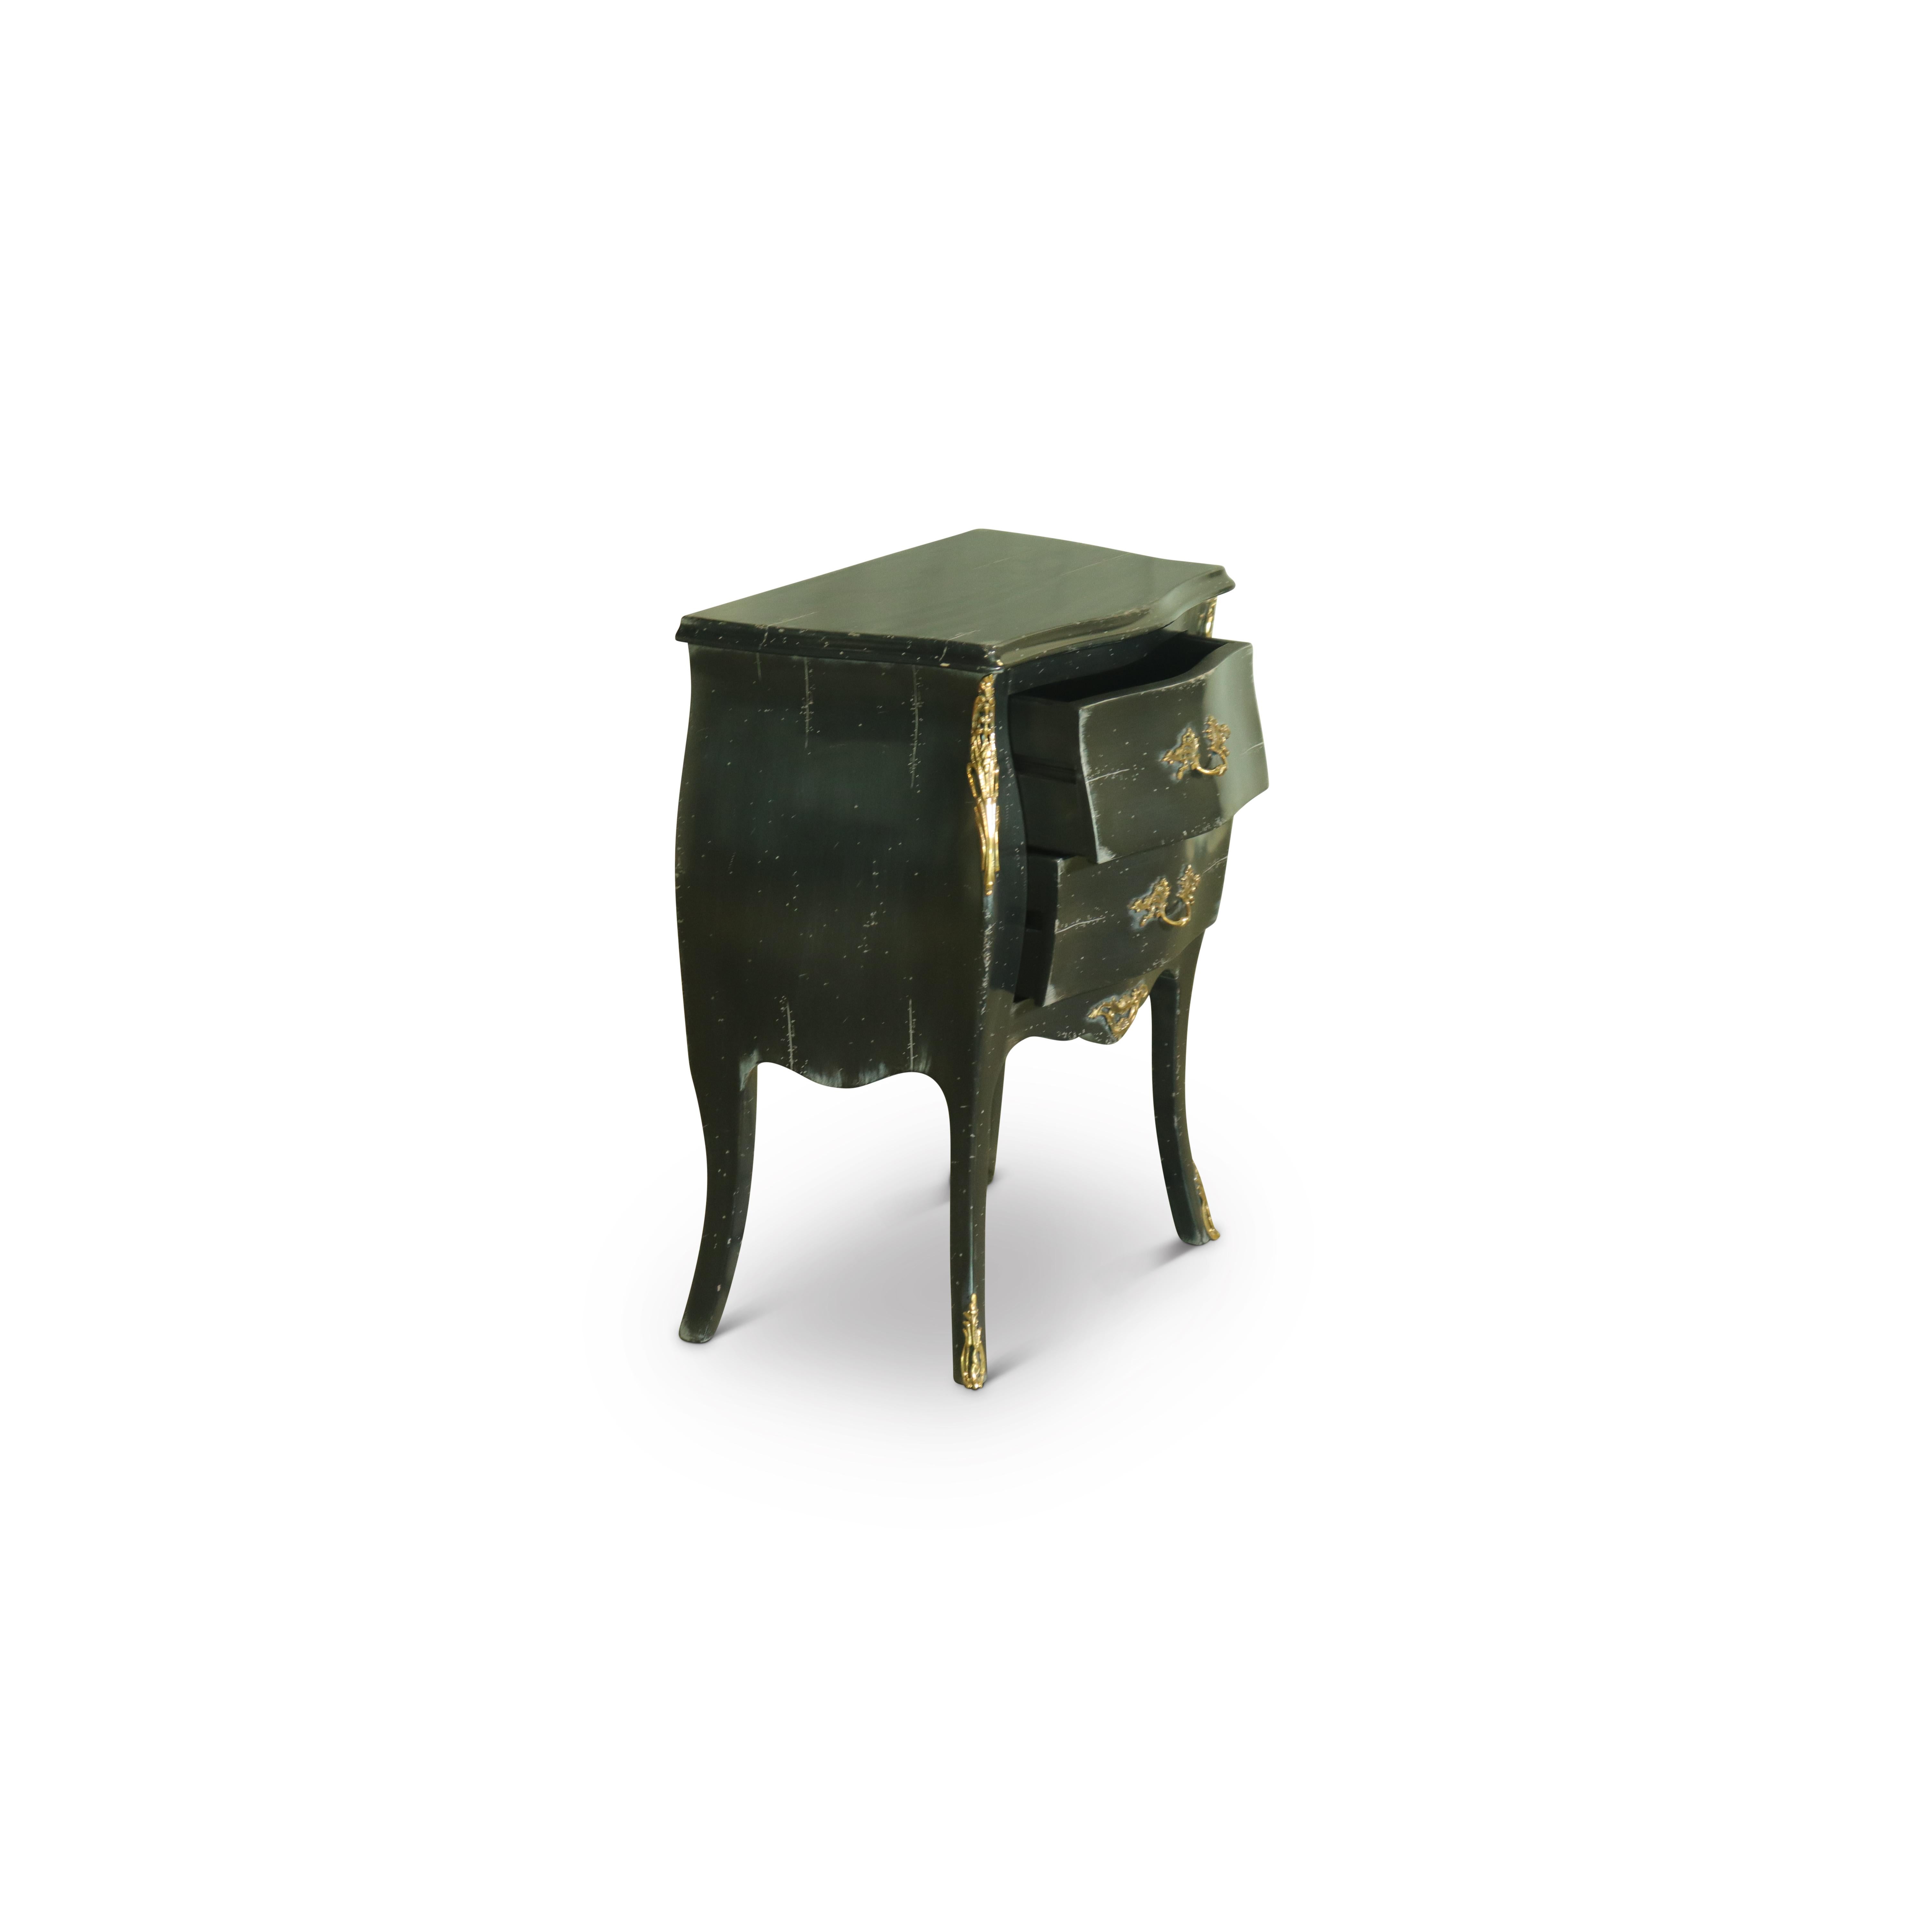 An exquisite pair of Luigi XV ebonized cherrywood nightstands, complete with gilt brass and bronze ormolu mounts and cabriole legs. These nightstands have been handcrafted in Venezia by Italian Designer House; Vangelista Mobili. These pieces come